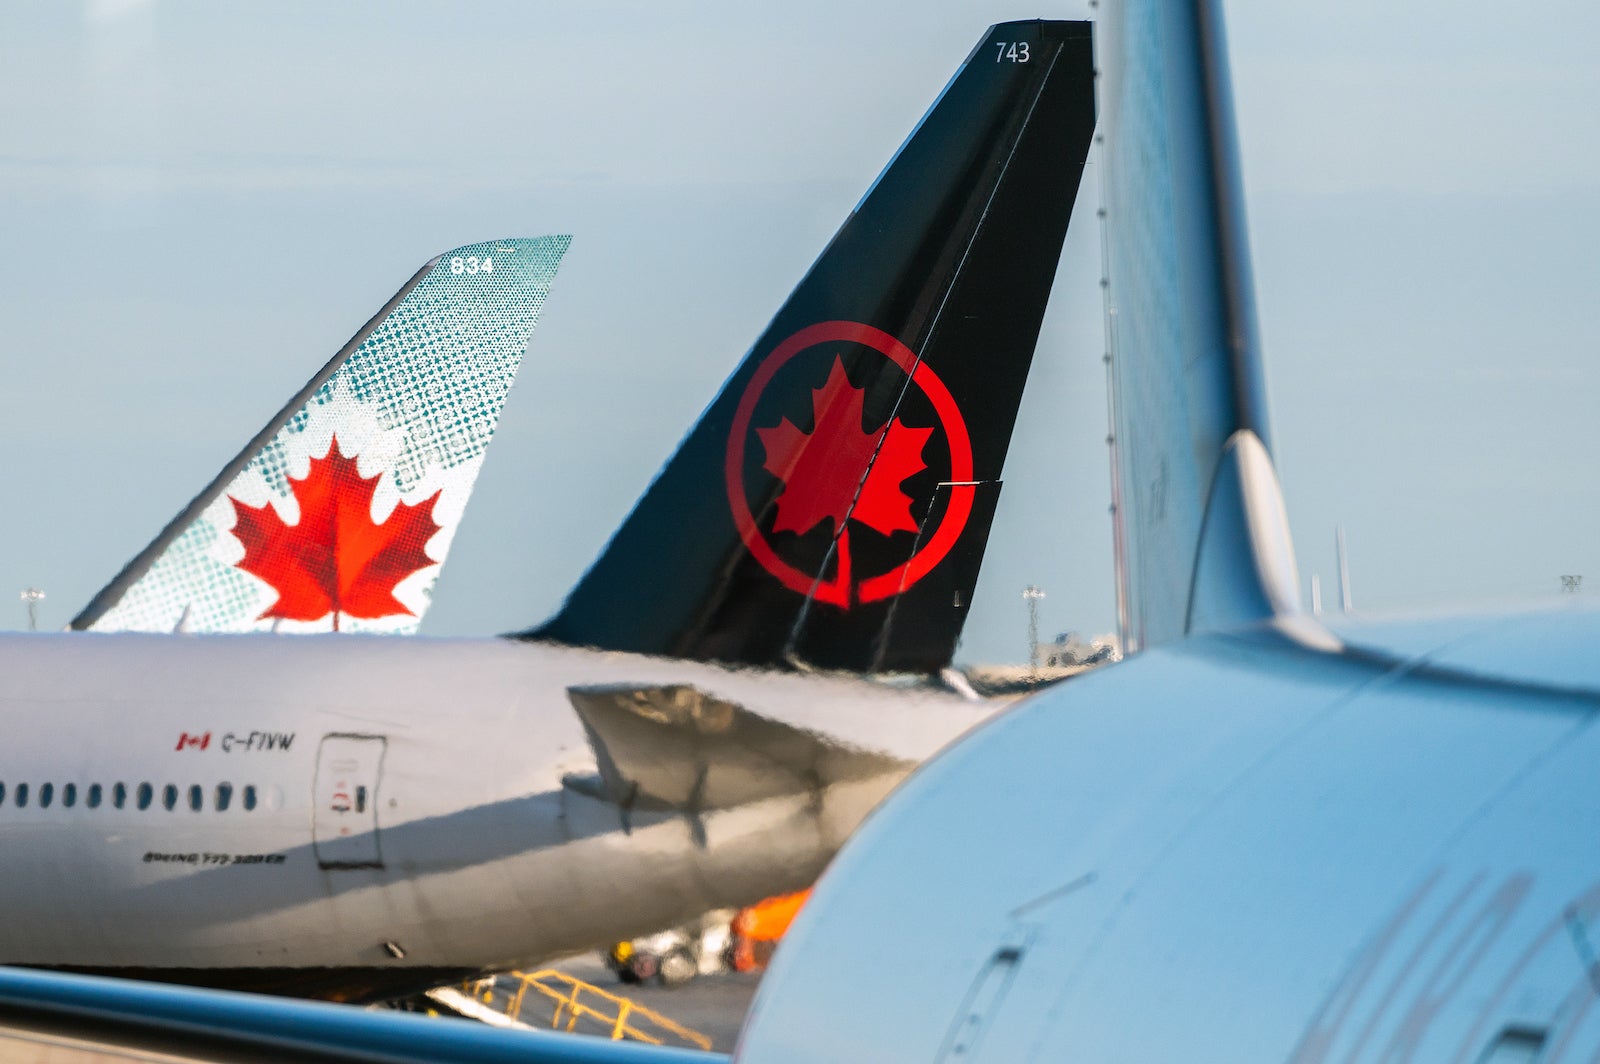 Air Canada planes on the tarmac in Toronto